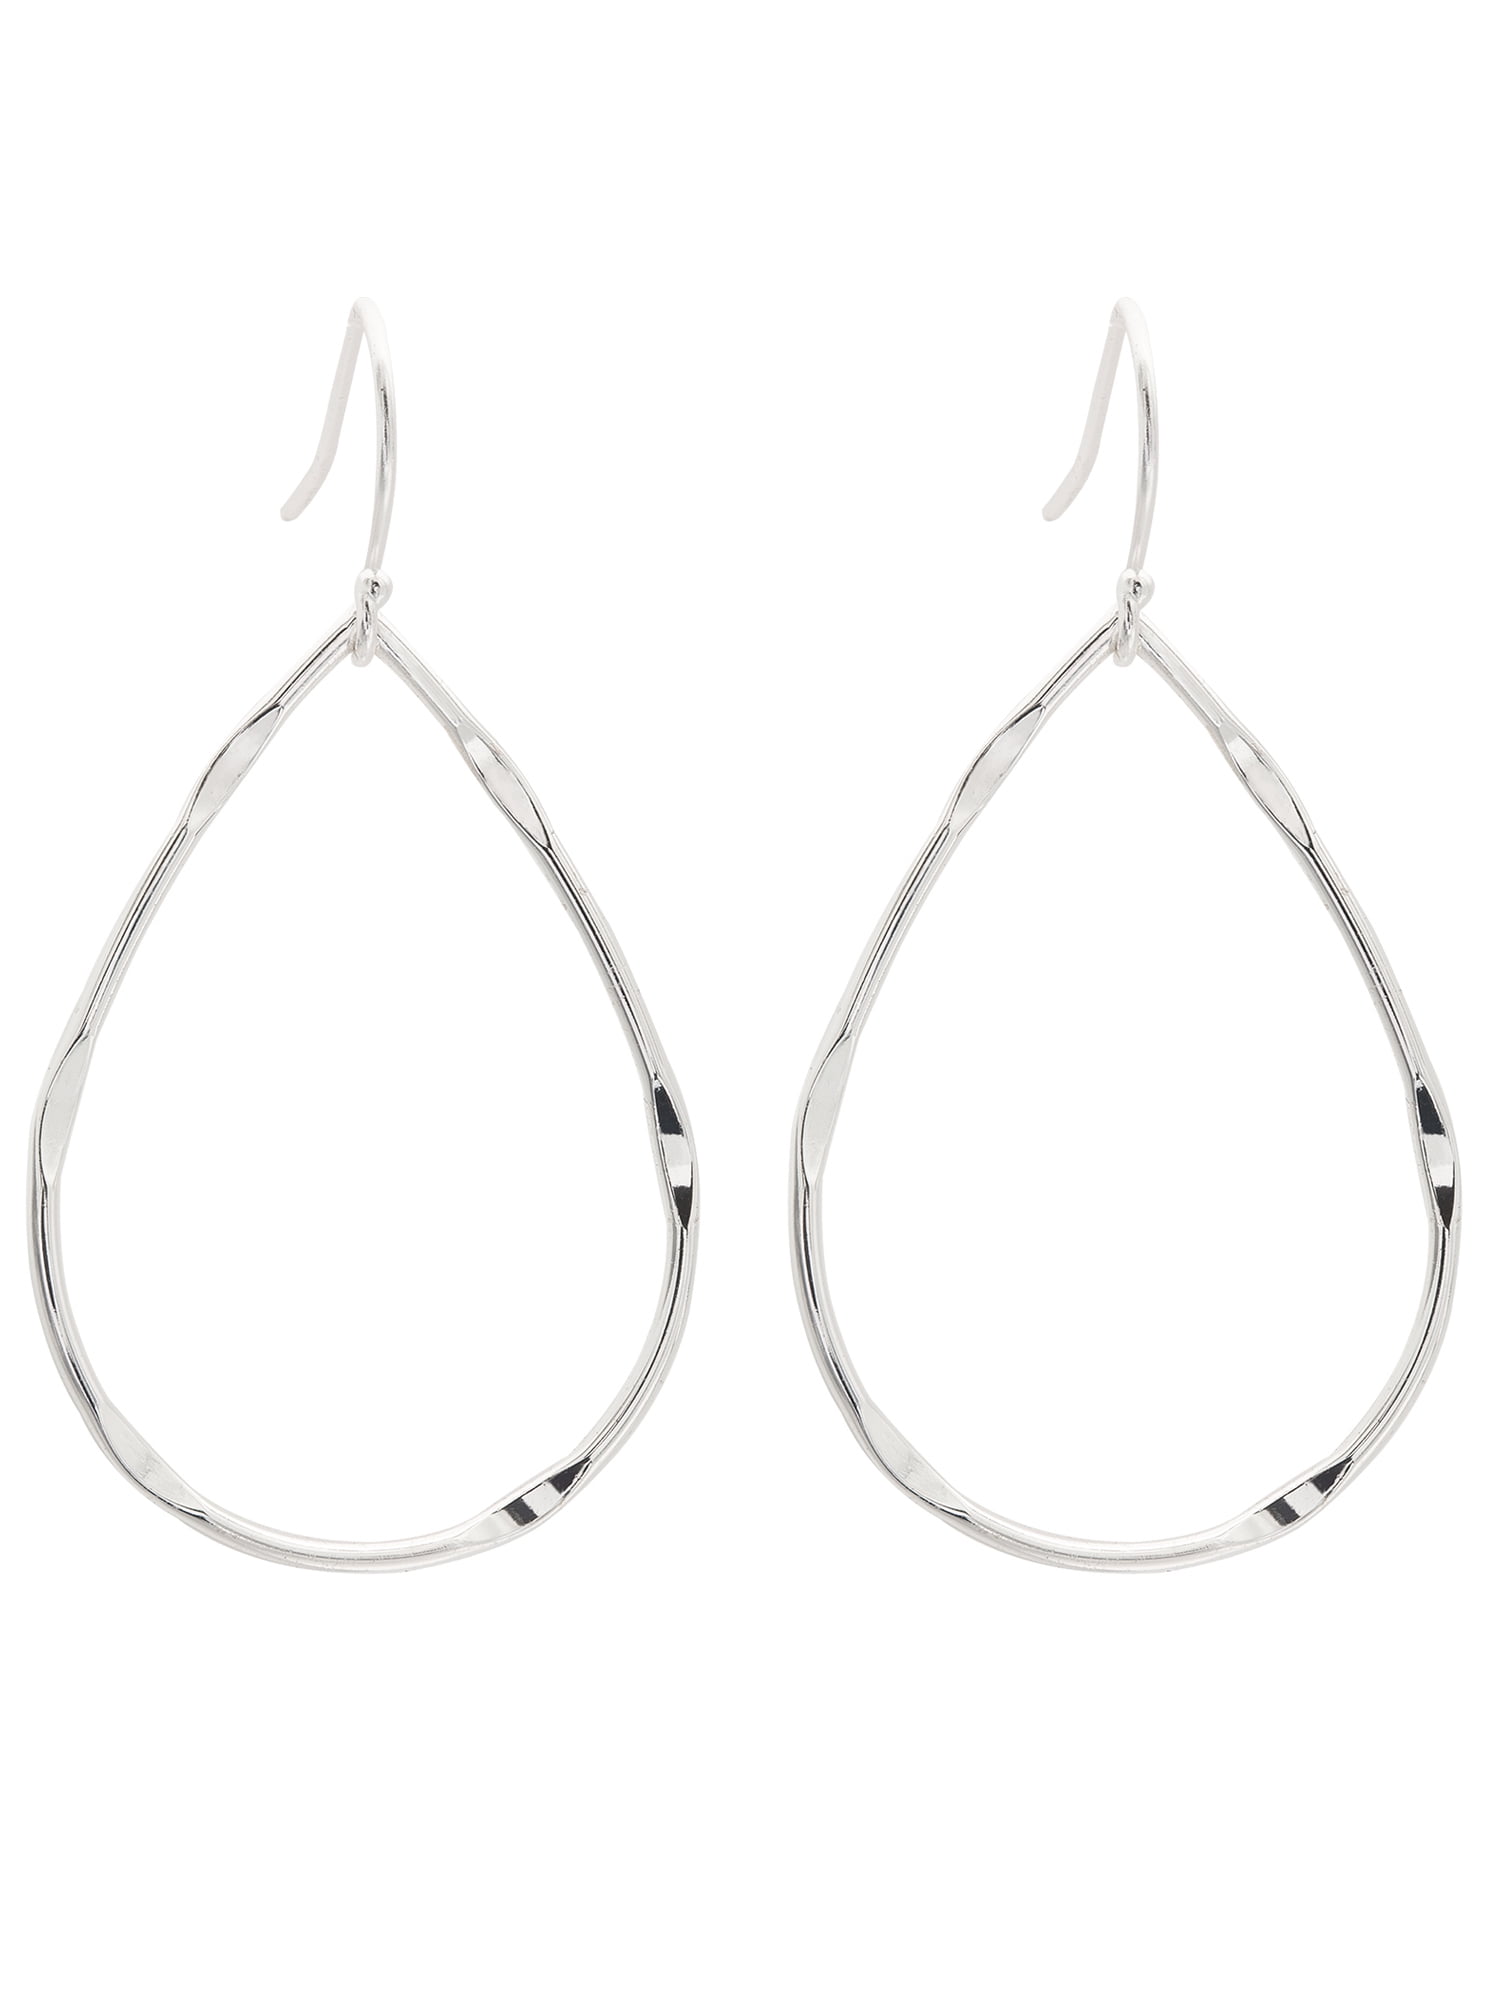 Hammered Silver French Ear wires Prisms Sterling Silver Tear Drop Earrings